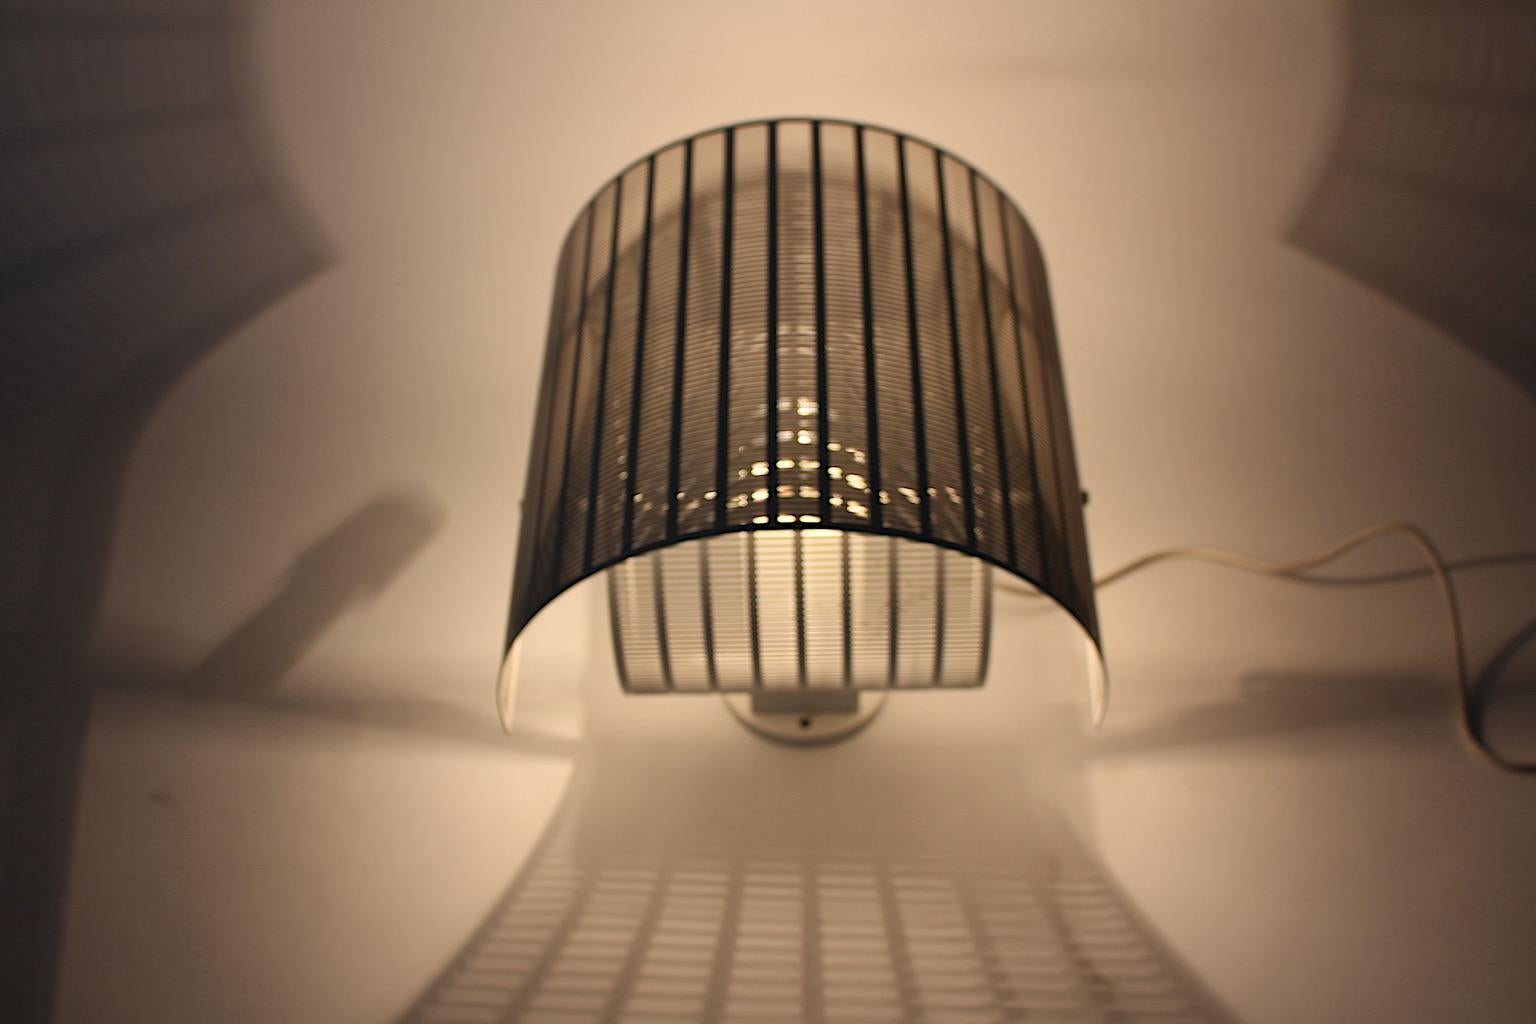 Postmodern White Vintage Sconce or Wall Light Shogun by Mario Botta, 1986 Italy For Sale 9